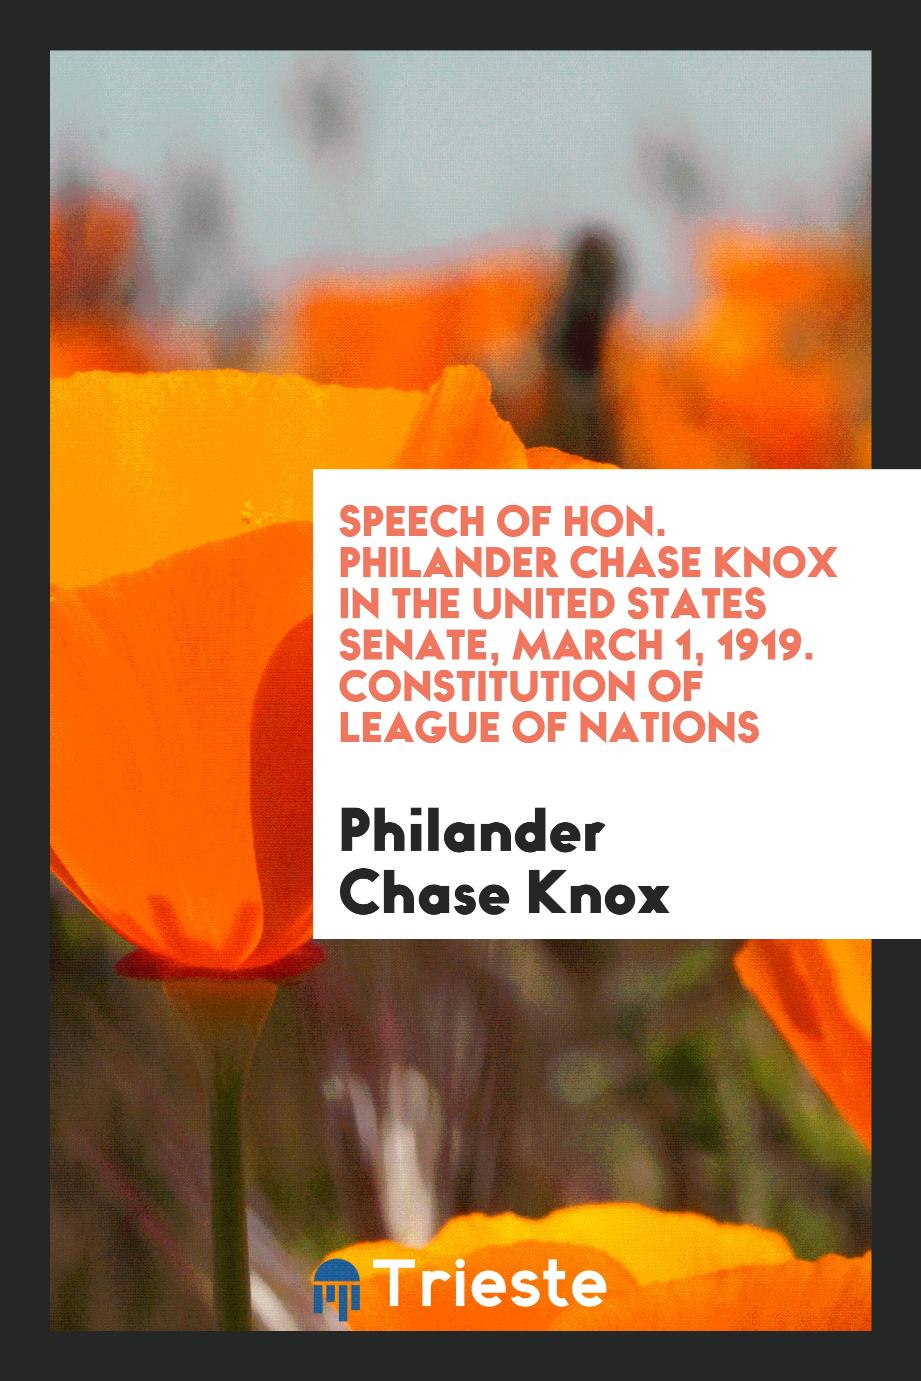 Speech of Hon. Philander Chase Knox in the United States Senate, March 1, 1919. Constitution of league of nations